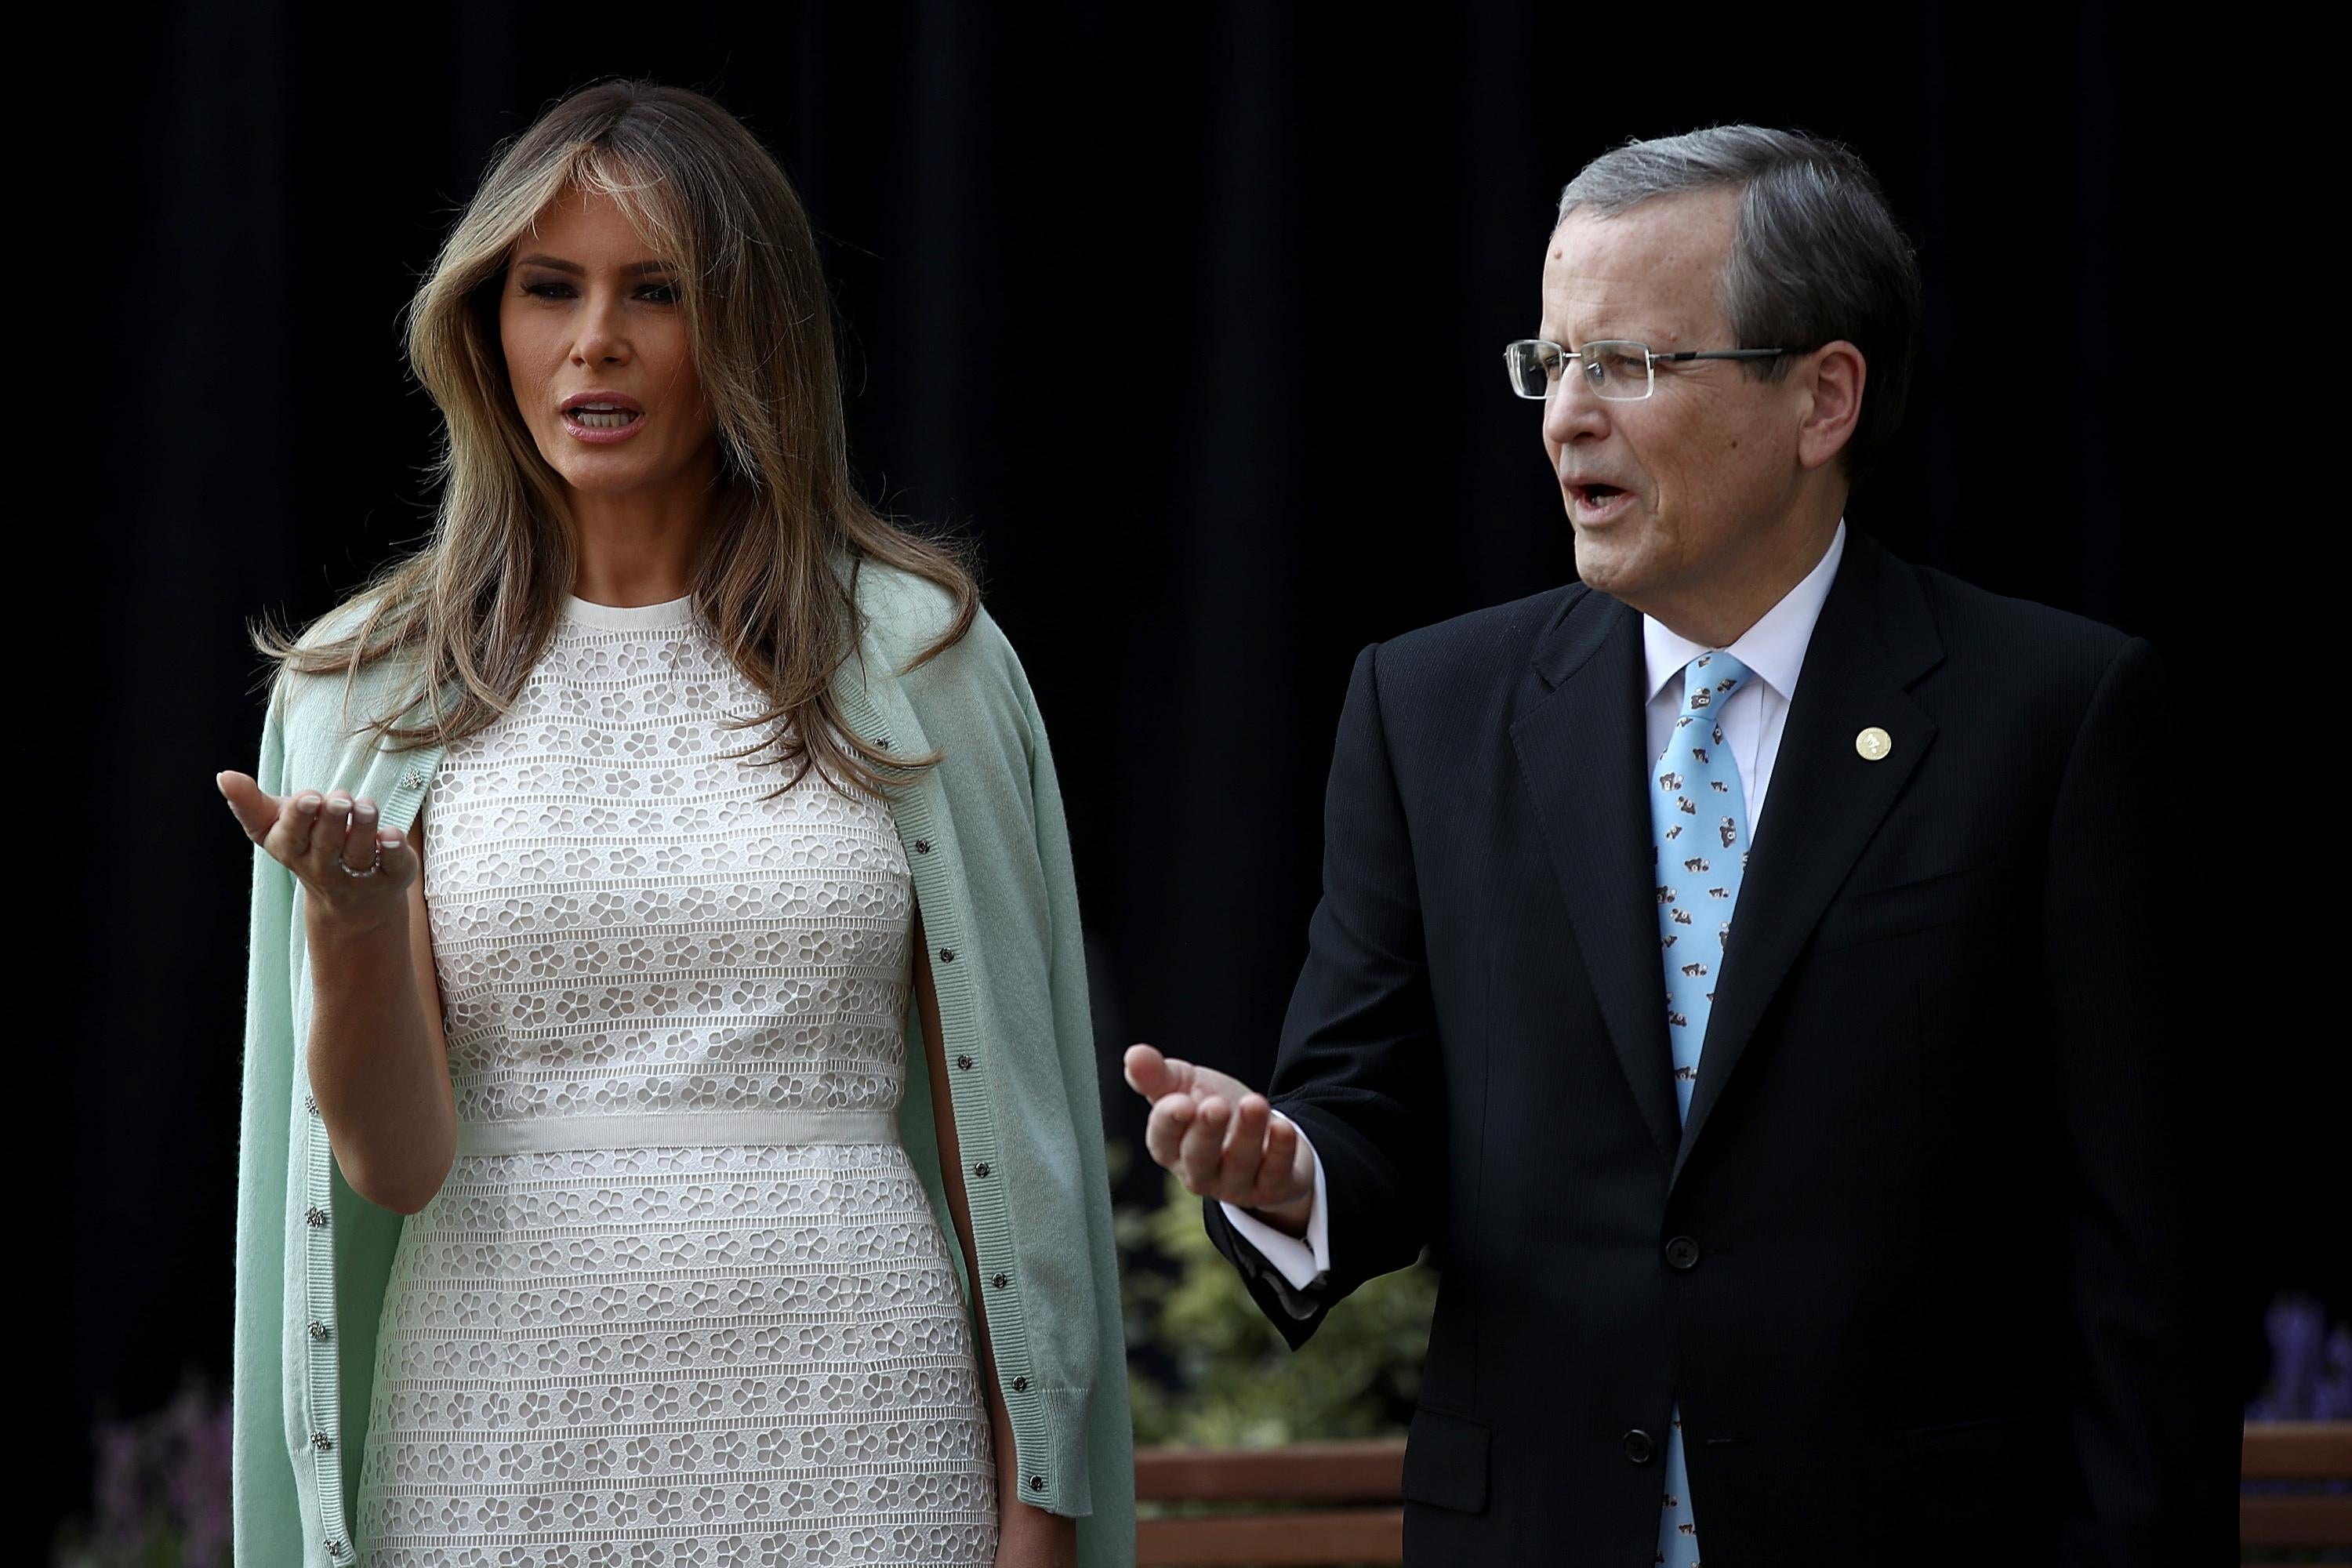 WASHINGTON, DC - APRIL 28:  U.S. first lady Melania Trump takes part in a 'Blessing of the Garden' with Michael Williams (R), chairman of the board, at the Children's National Health System April 28, 2017 in Washington, DC. Trump spoke a the opening of the Bunny Mellon Healing Garden for patients and famlies, an outdoor location for to safely spend time outdoors while receiving treatment at the hospital.  (Photo by Win McNamee/Getty Images)